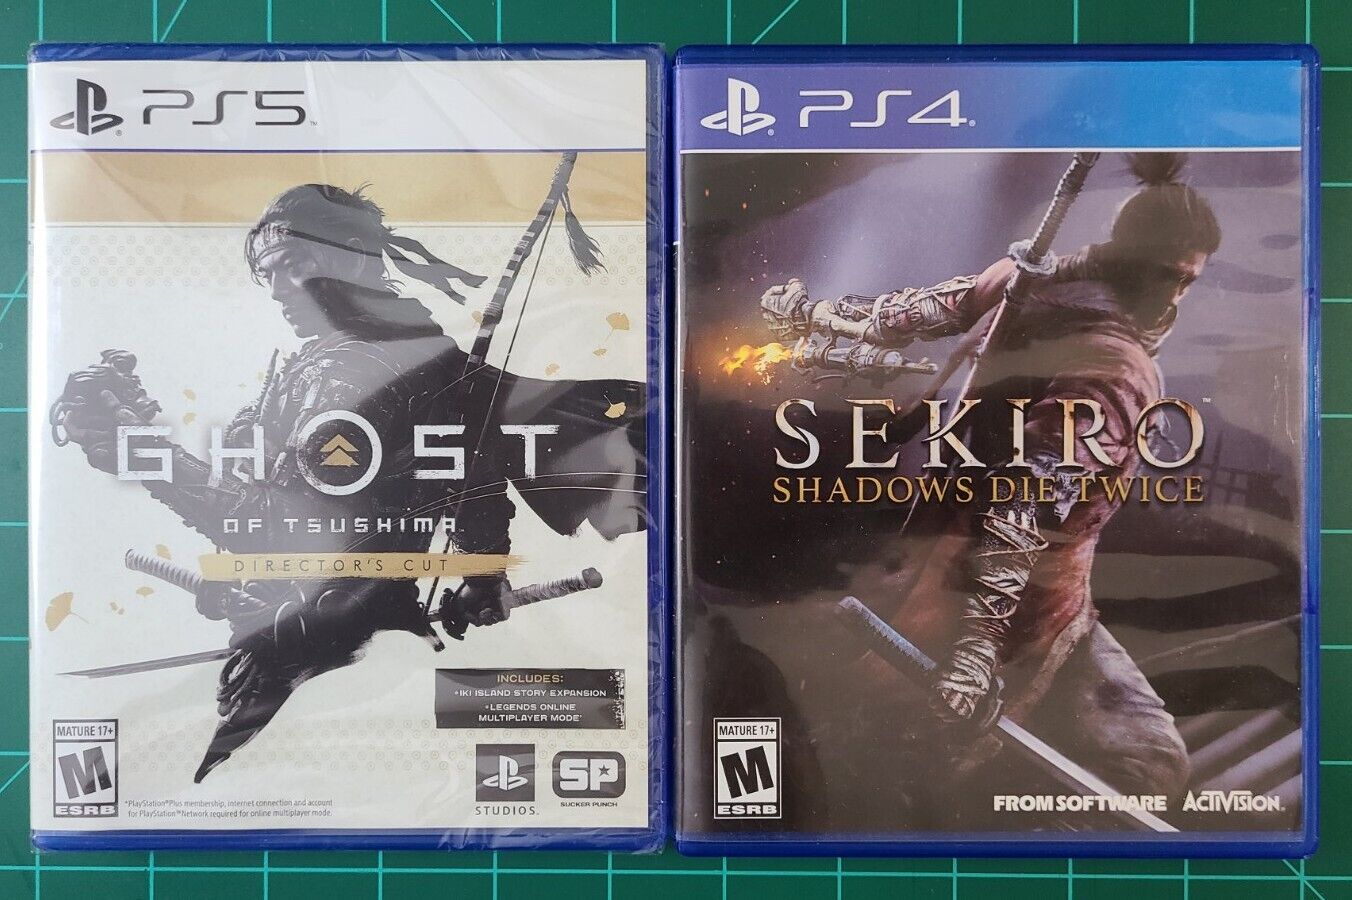 Ghost of Tsushima Director's Cut PS5 (New) + Sekiro PS4 (Used)